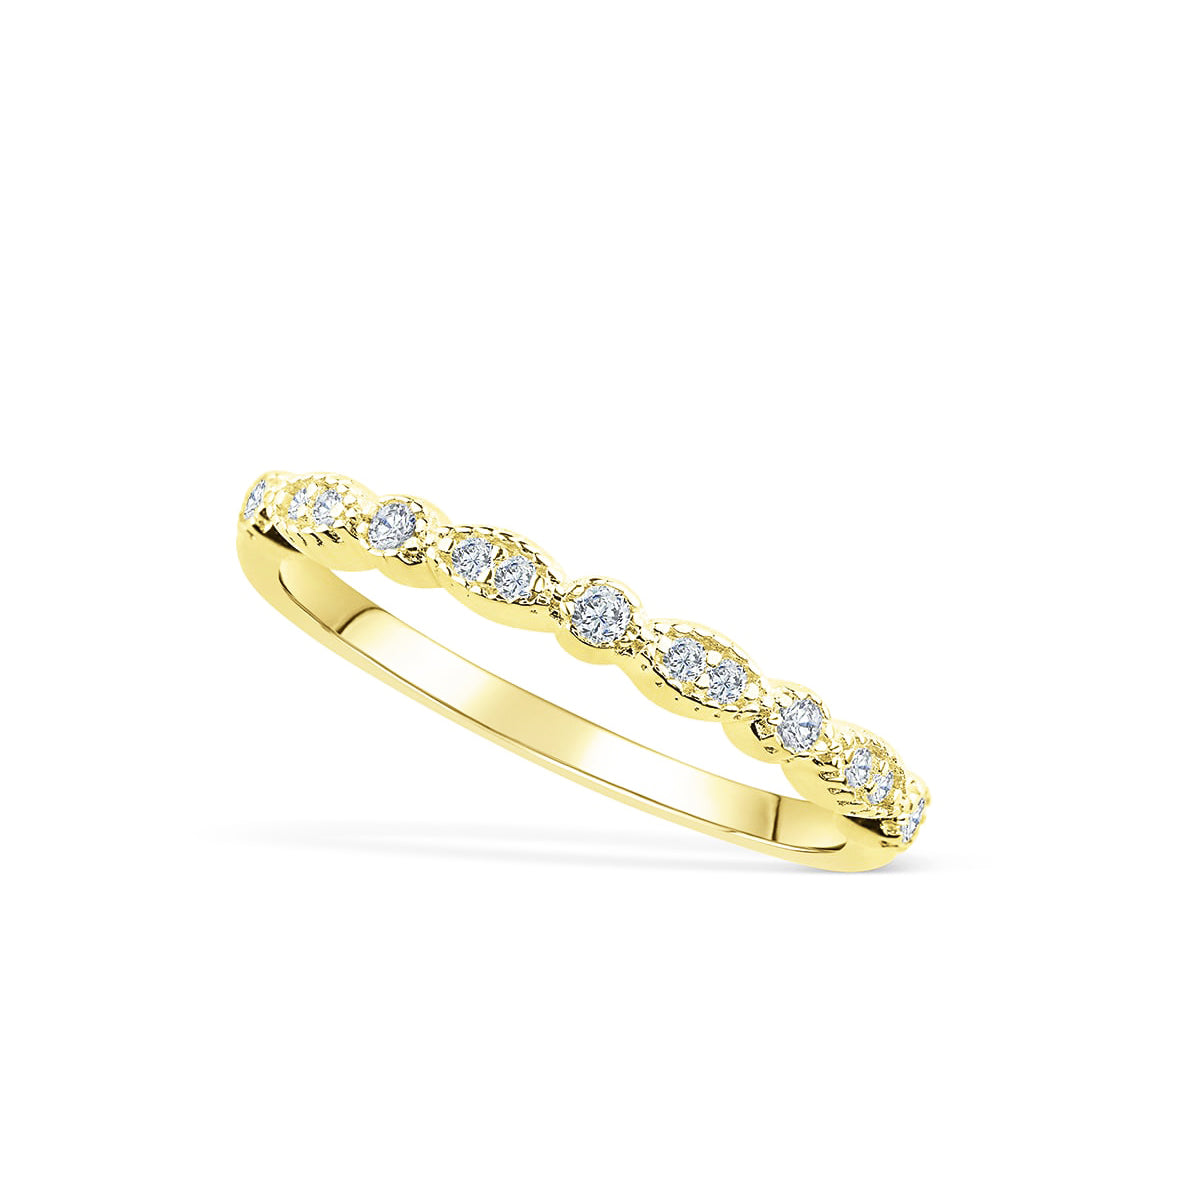 Affordable gold wedding band the forever